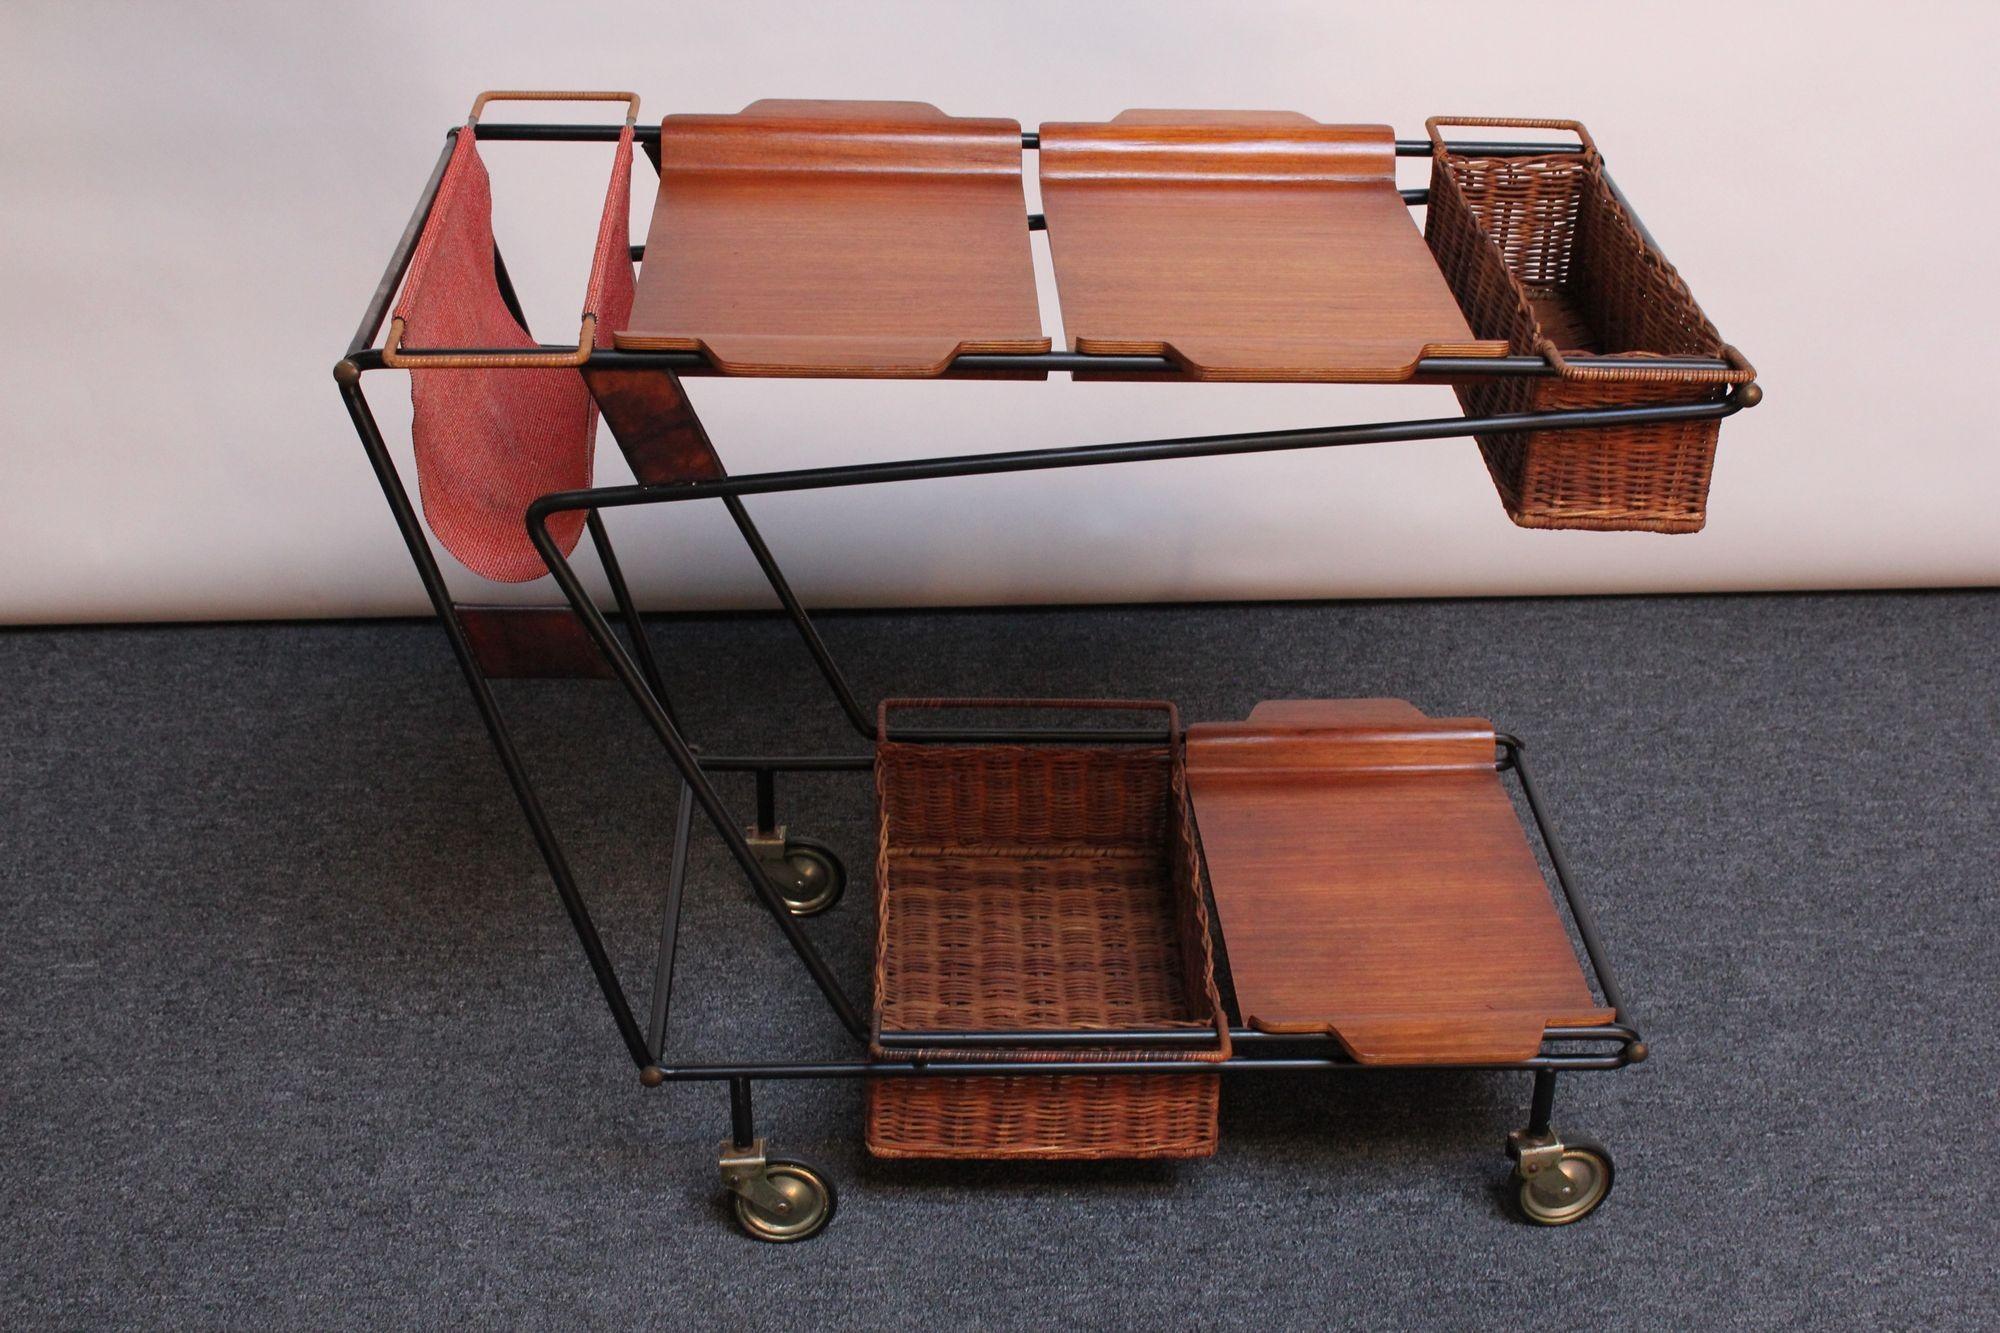 Unique drinks cart / trolley composed of a wrought iron frame with mixed metal inset panels accessorized with plywood trays and wicker baskets, all supported by caster wheels (ca. 1950s, Italy). Inserts can be configured in different ways, as shown,